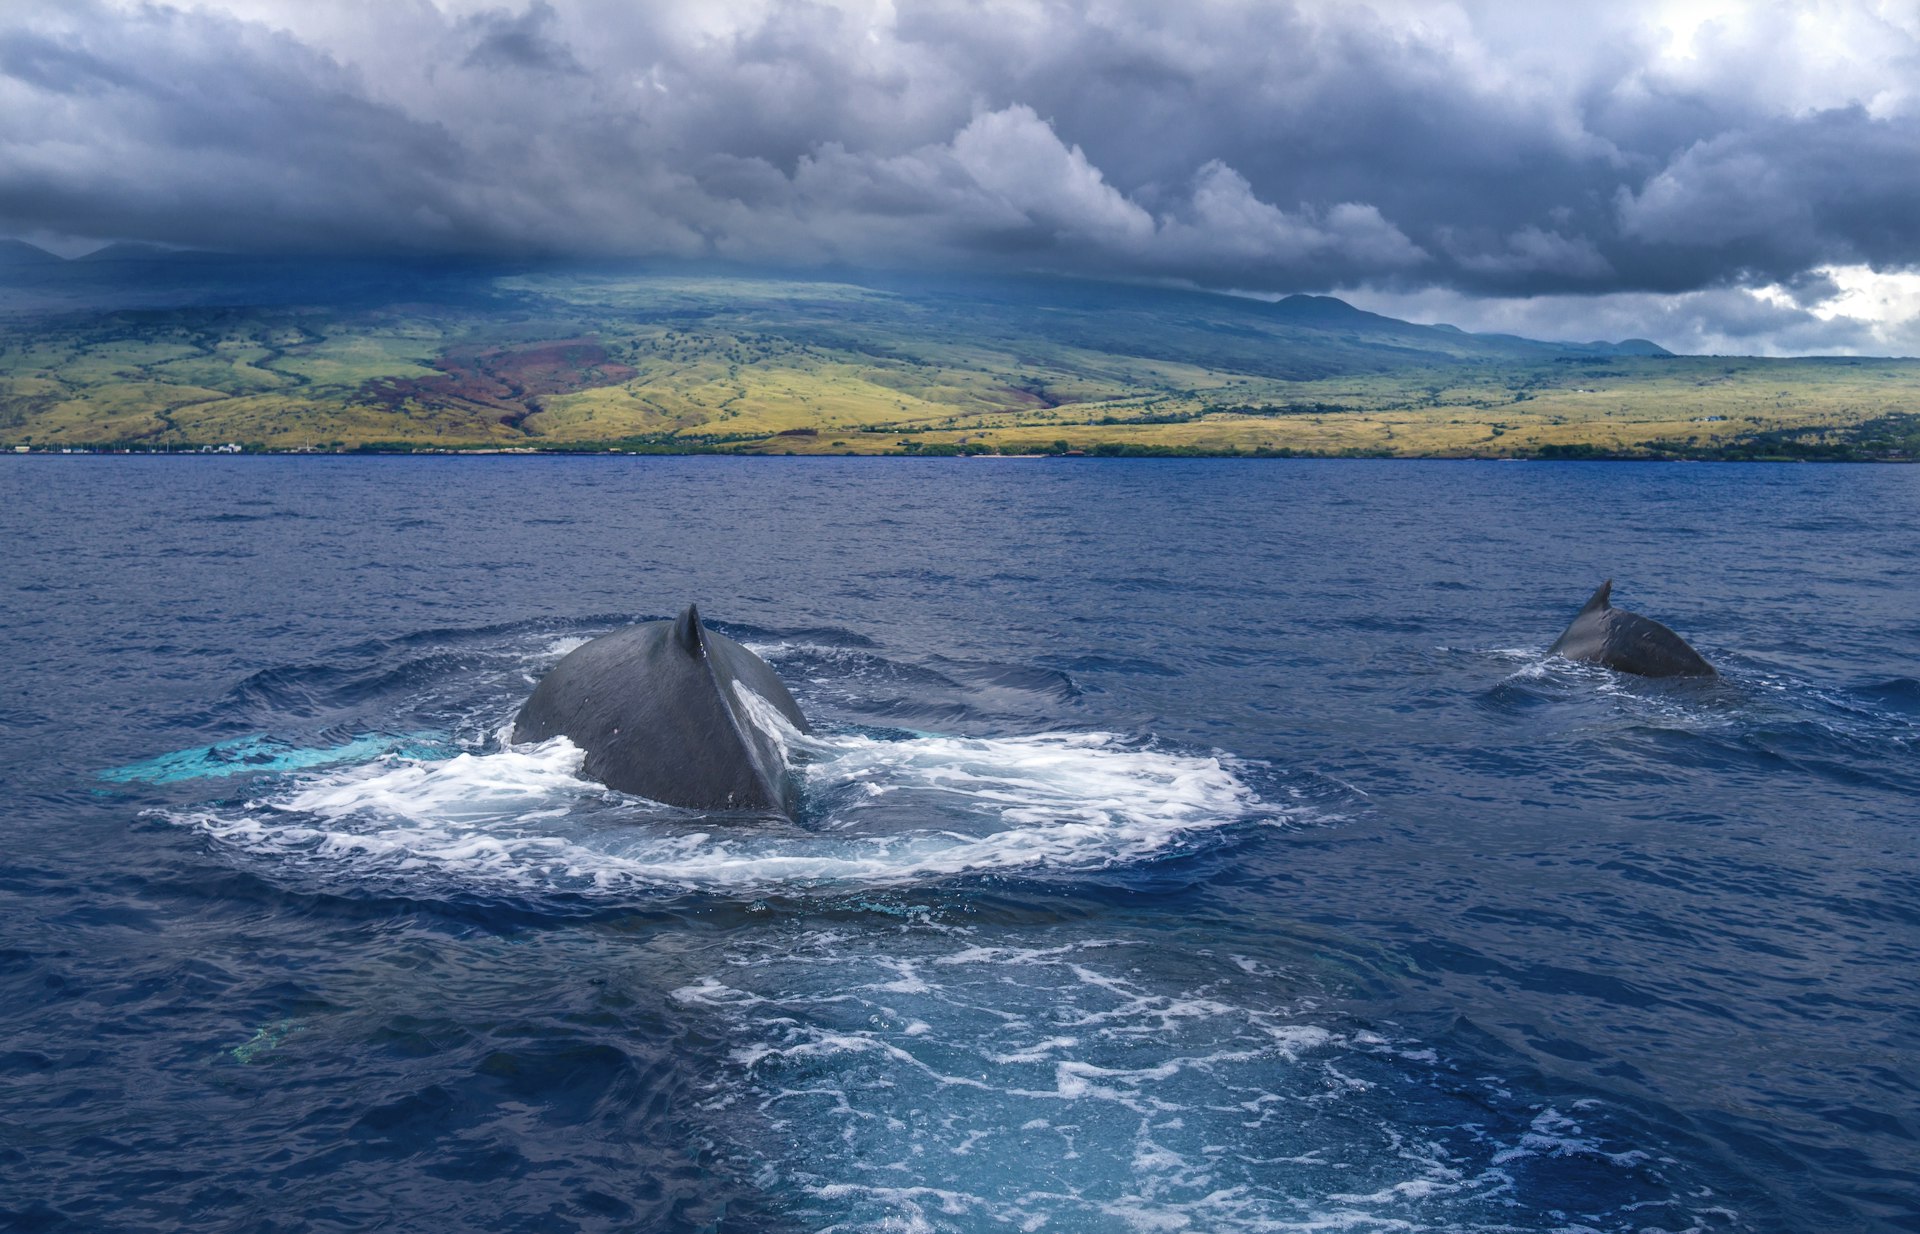 Humpback whales breaching the surface of the water near an island